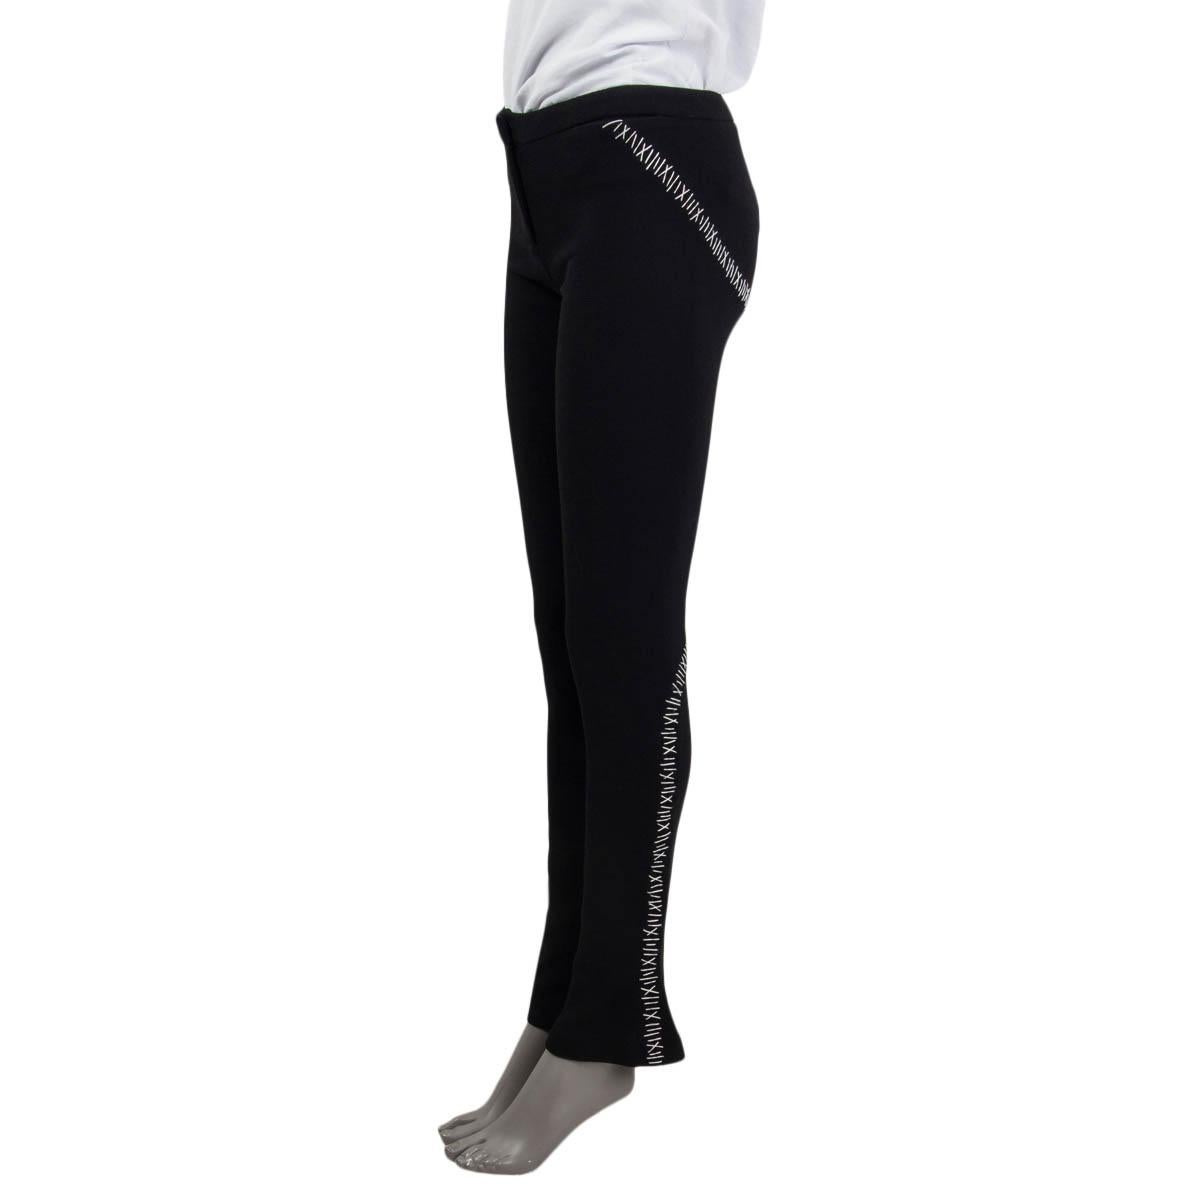 100% authentic Alexander McQueen flared pants in black wool and elastane (assumed cause tag is missing). Feature a white stitched hem, two slit pockets on the front and zipped cuffs. Open with a zipper, hook and a button on the front. Unlined. Have